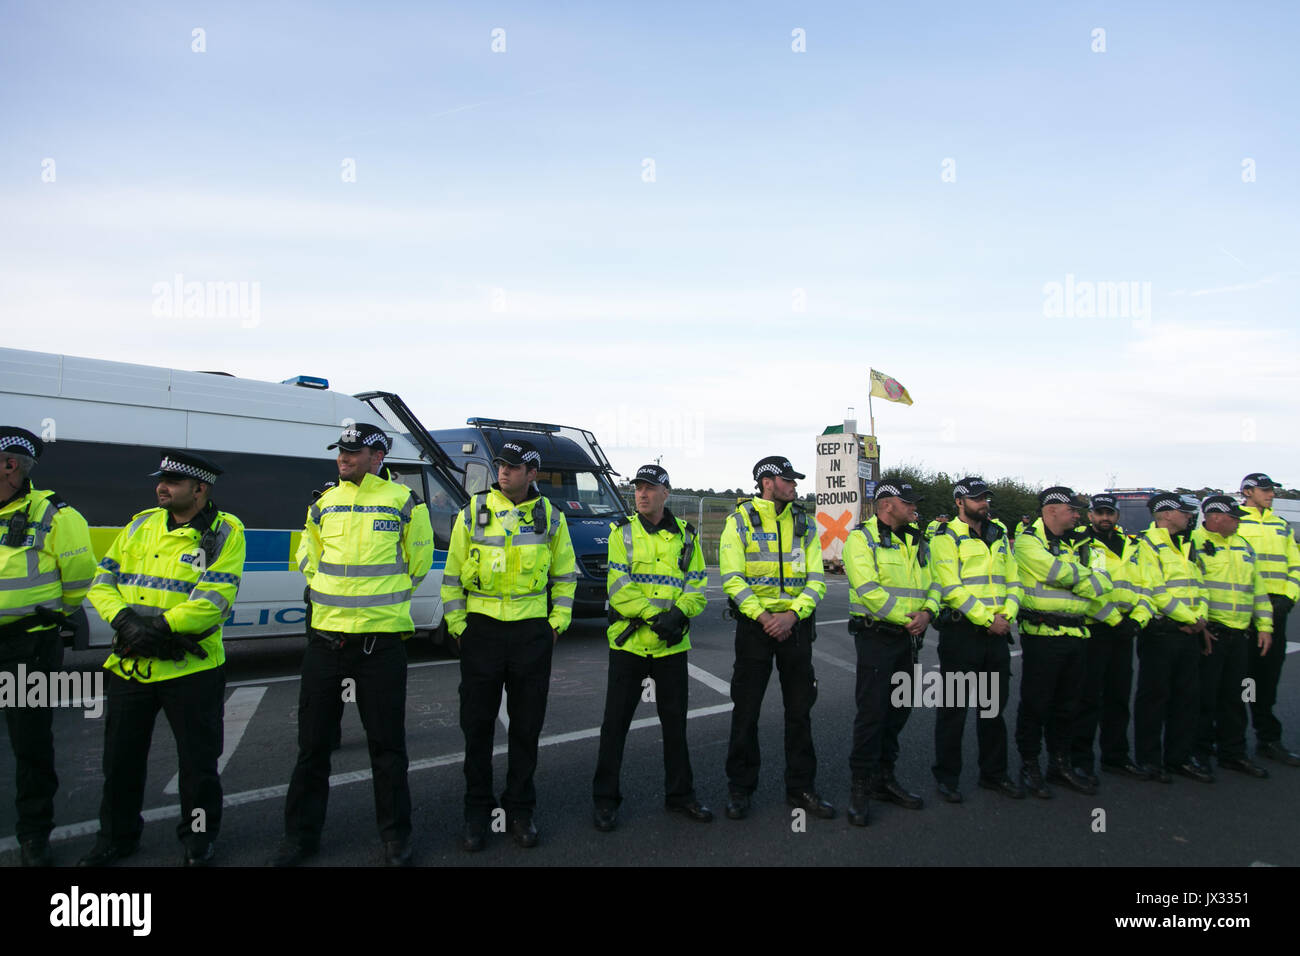 A line of police protects the Quadrilla fracking site in Preston New Road. The entrance had been blocked all day by protesters but now cleared. Stock Photo